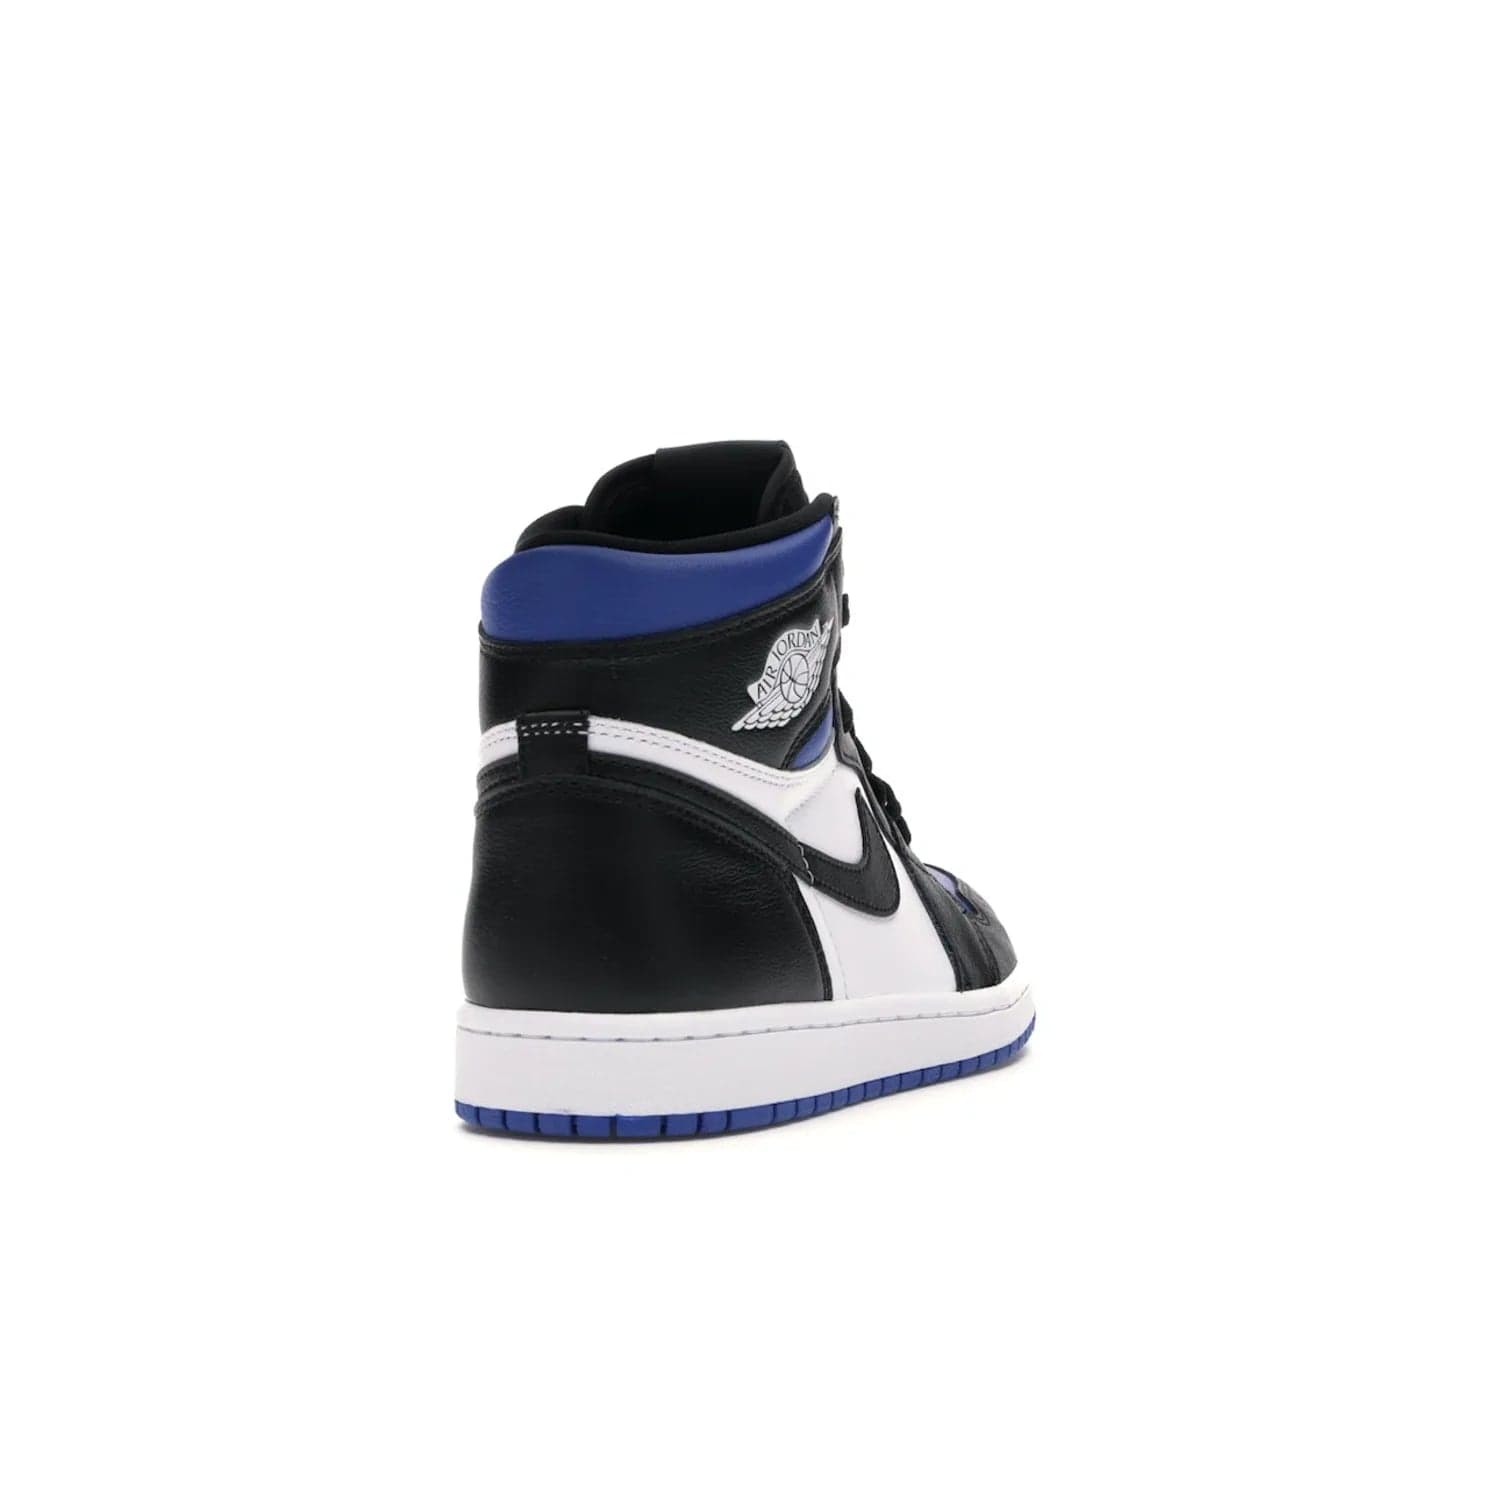 Jordan 1 Retro High Royal Toe - Image 30 - Only at www.BallersClubKickz.com - Refresh your look with the Jordan 1 Retro High Royal Toe. This classic AJ 1 sports a white and royal leather upper, black leather overlays, and branded leather tongue tag. Pick up today and set the streets ablaze.